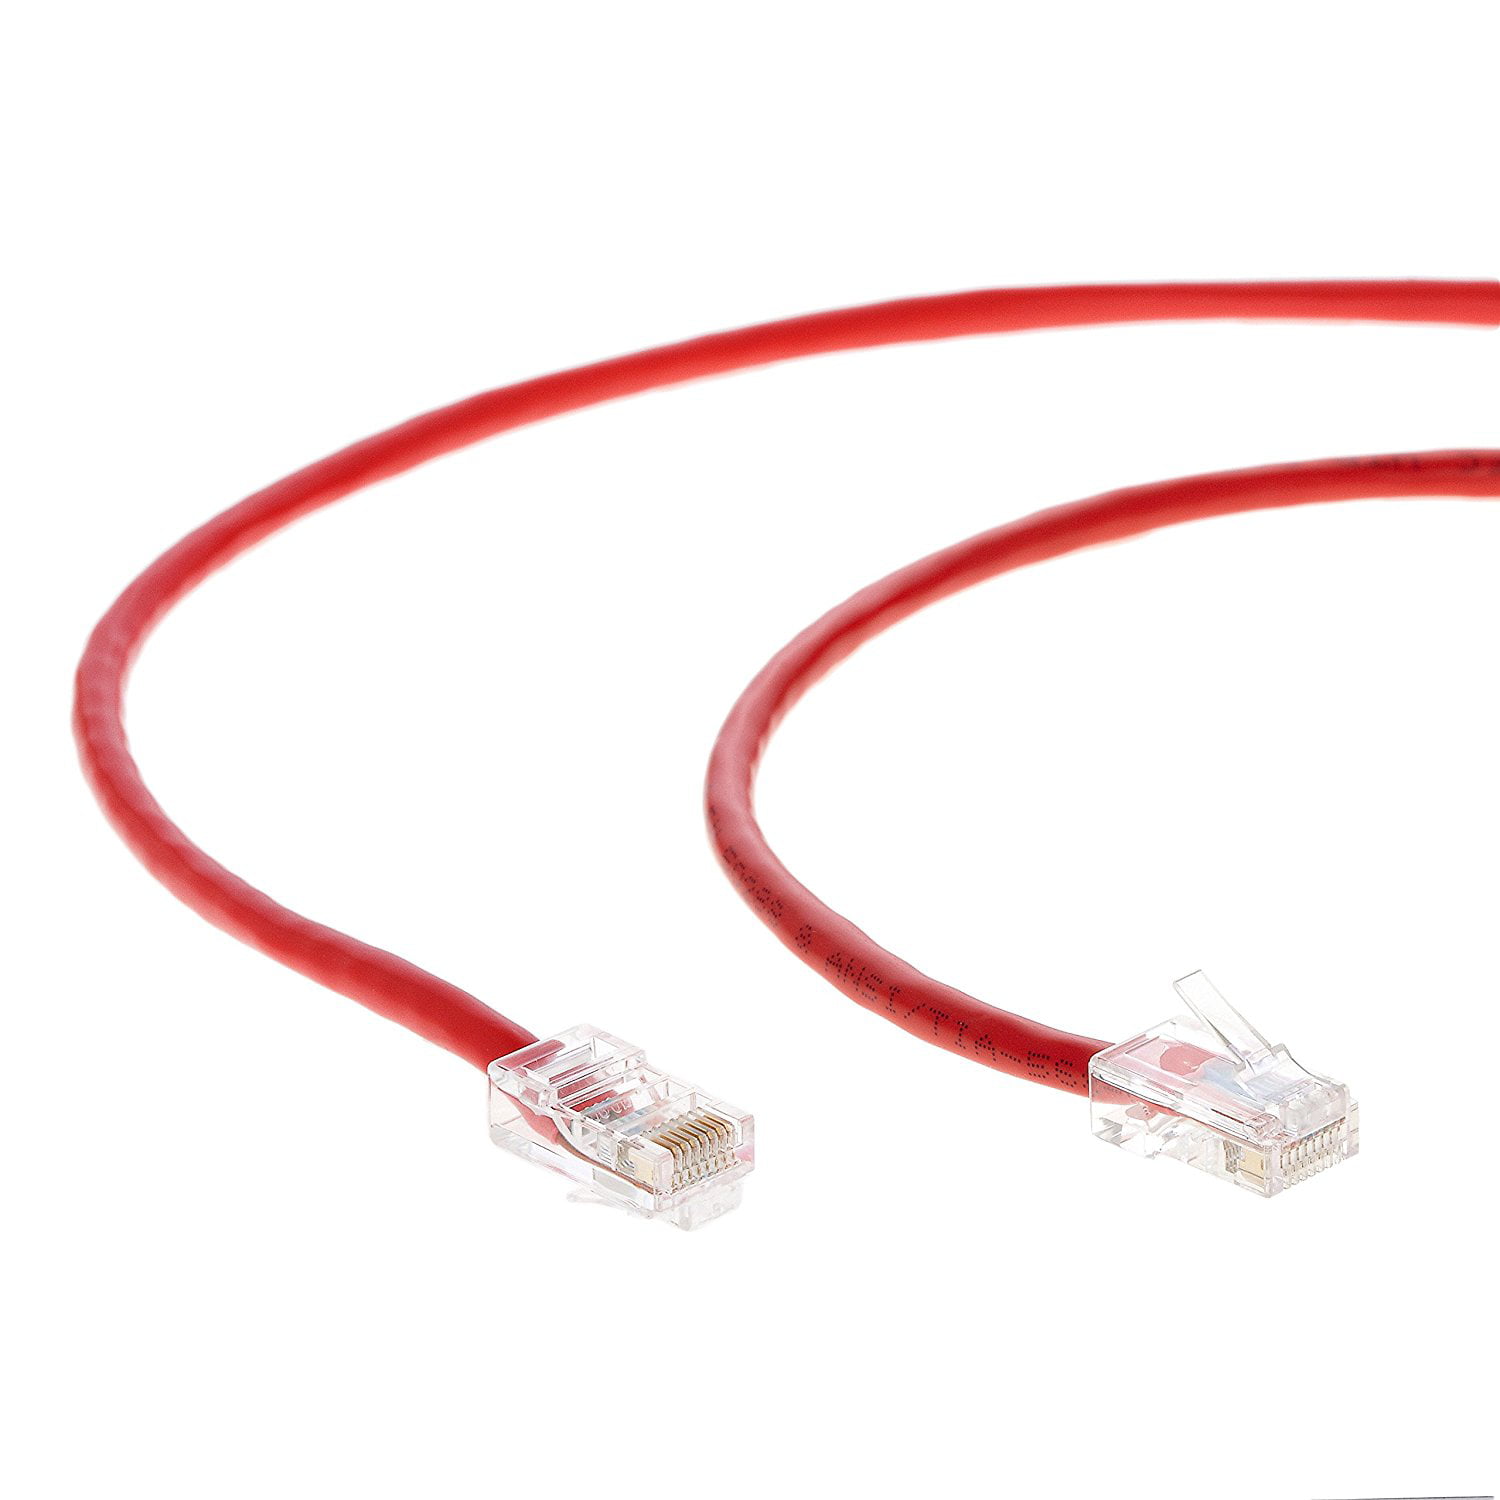 5 Pack Red Professional Series 550MHZ 10Gigabit/Sec Network/High Speed Internet Cable Ethernet Cable CAT6 Cable UTP Non-Booted 15 FT InstallerParts 